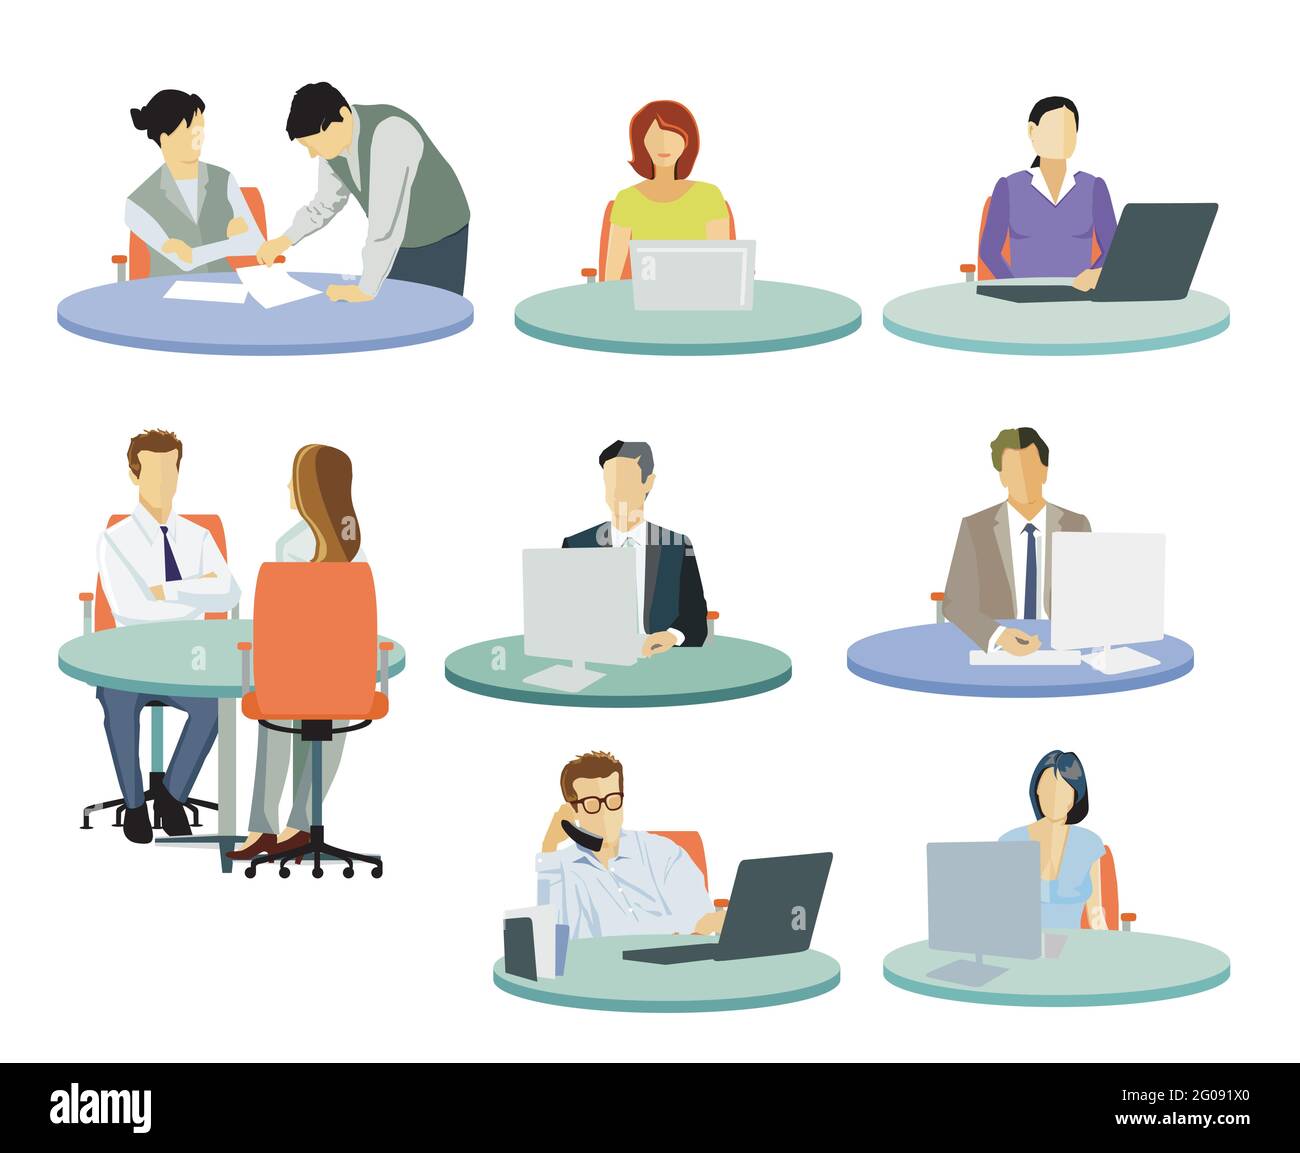 Workplaces in the office, people working at desk, illustration Stock Vector